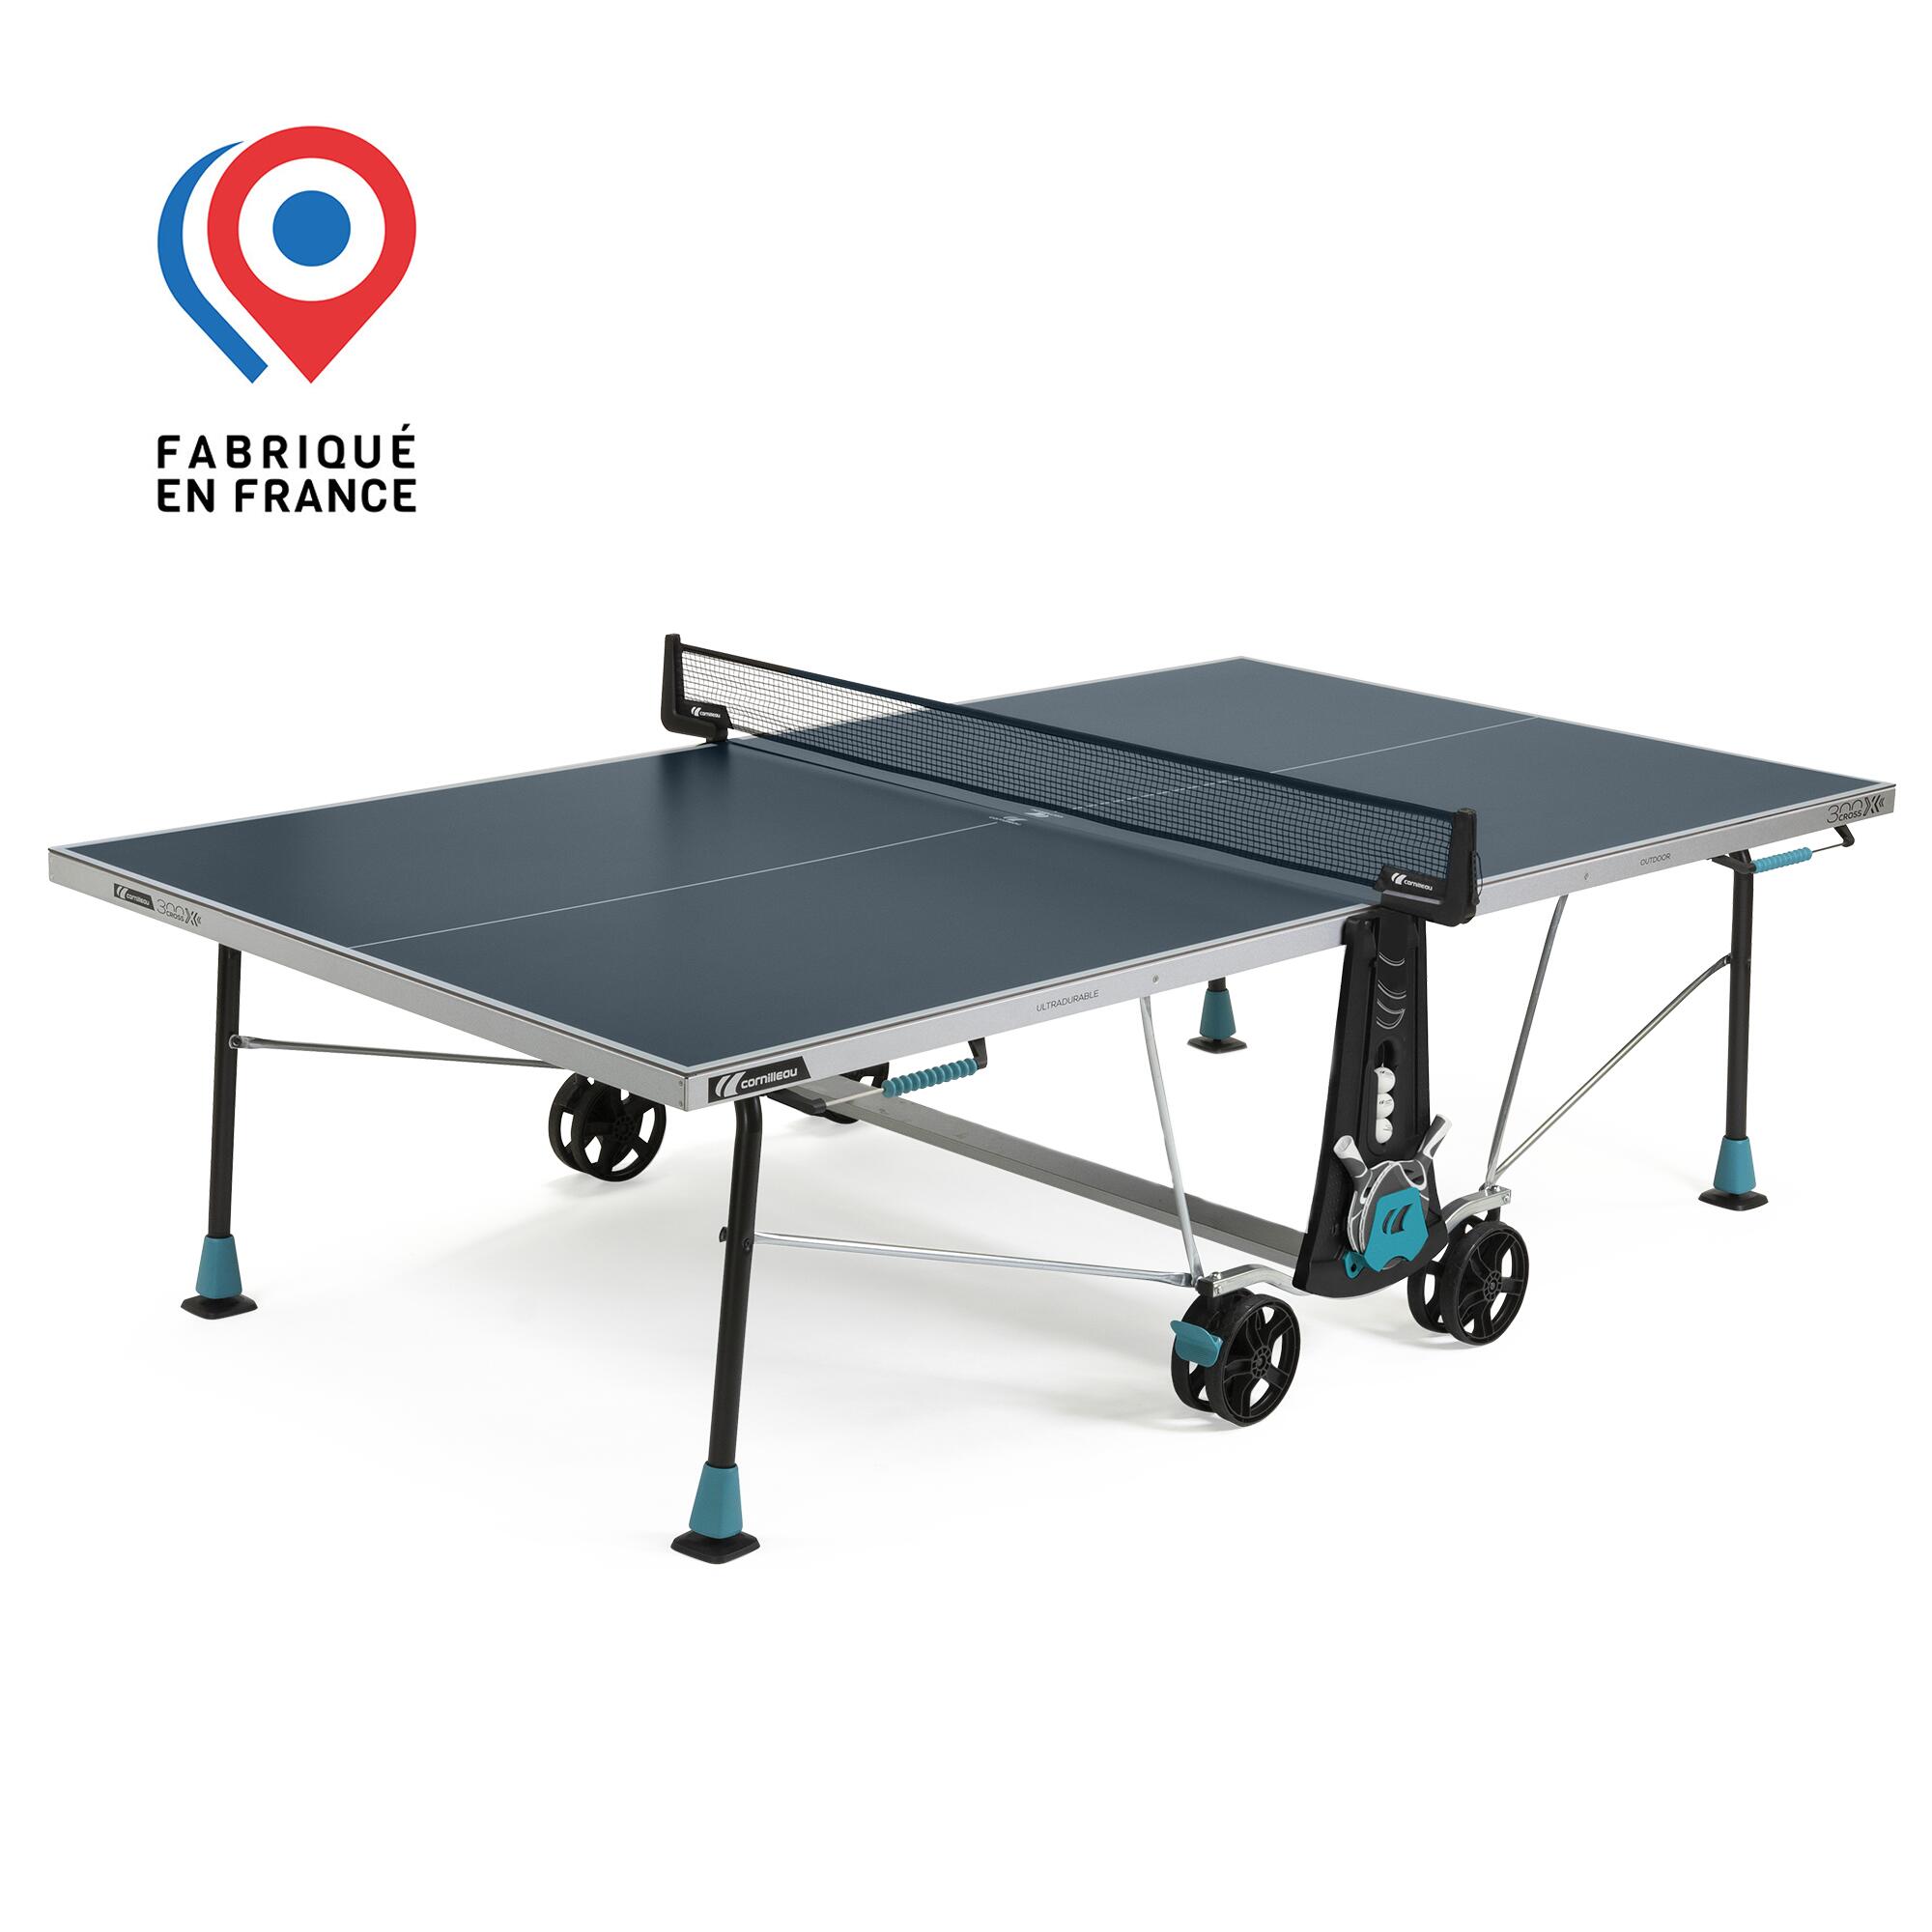 300X Sport Outdoor Table Tennis Table - Blue 1/8